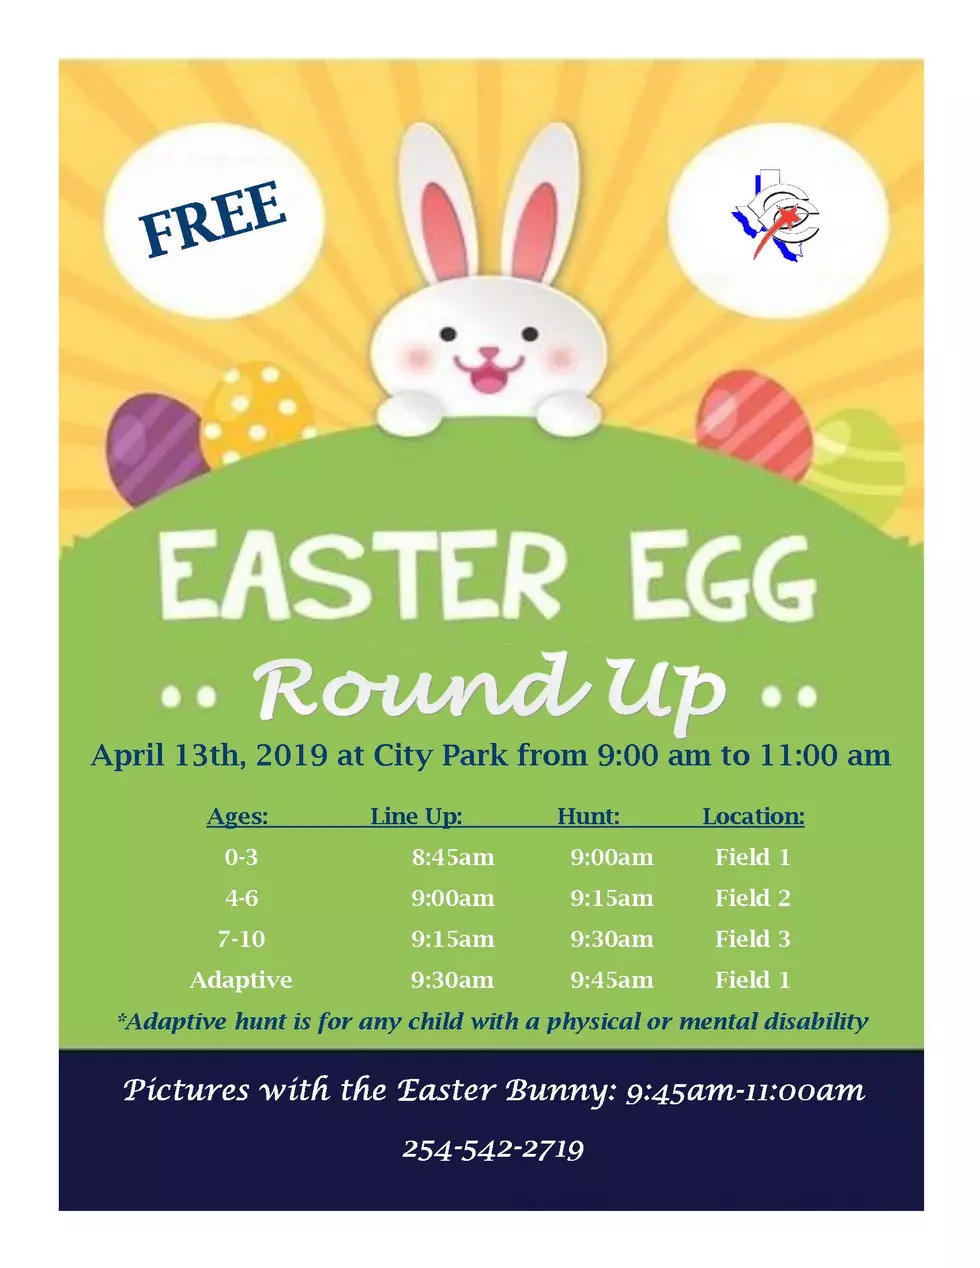 Copperas Cove’s 2019 Easter Egg Round Up On April 13th